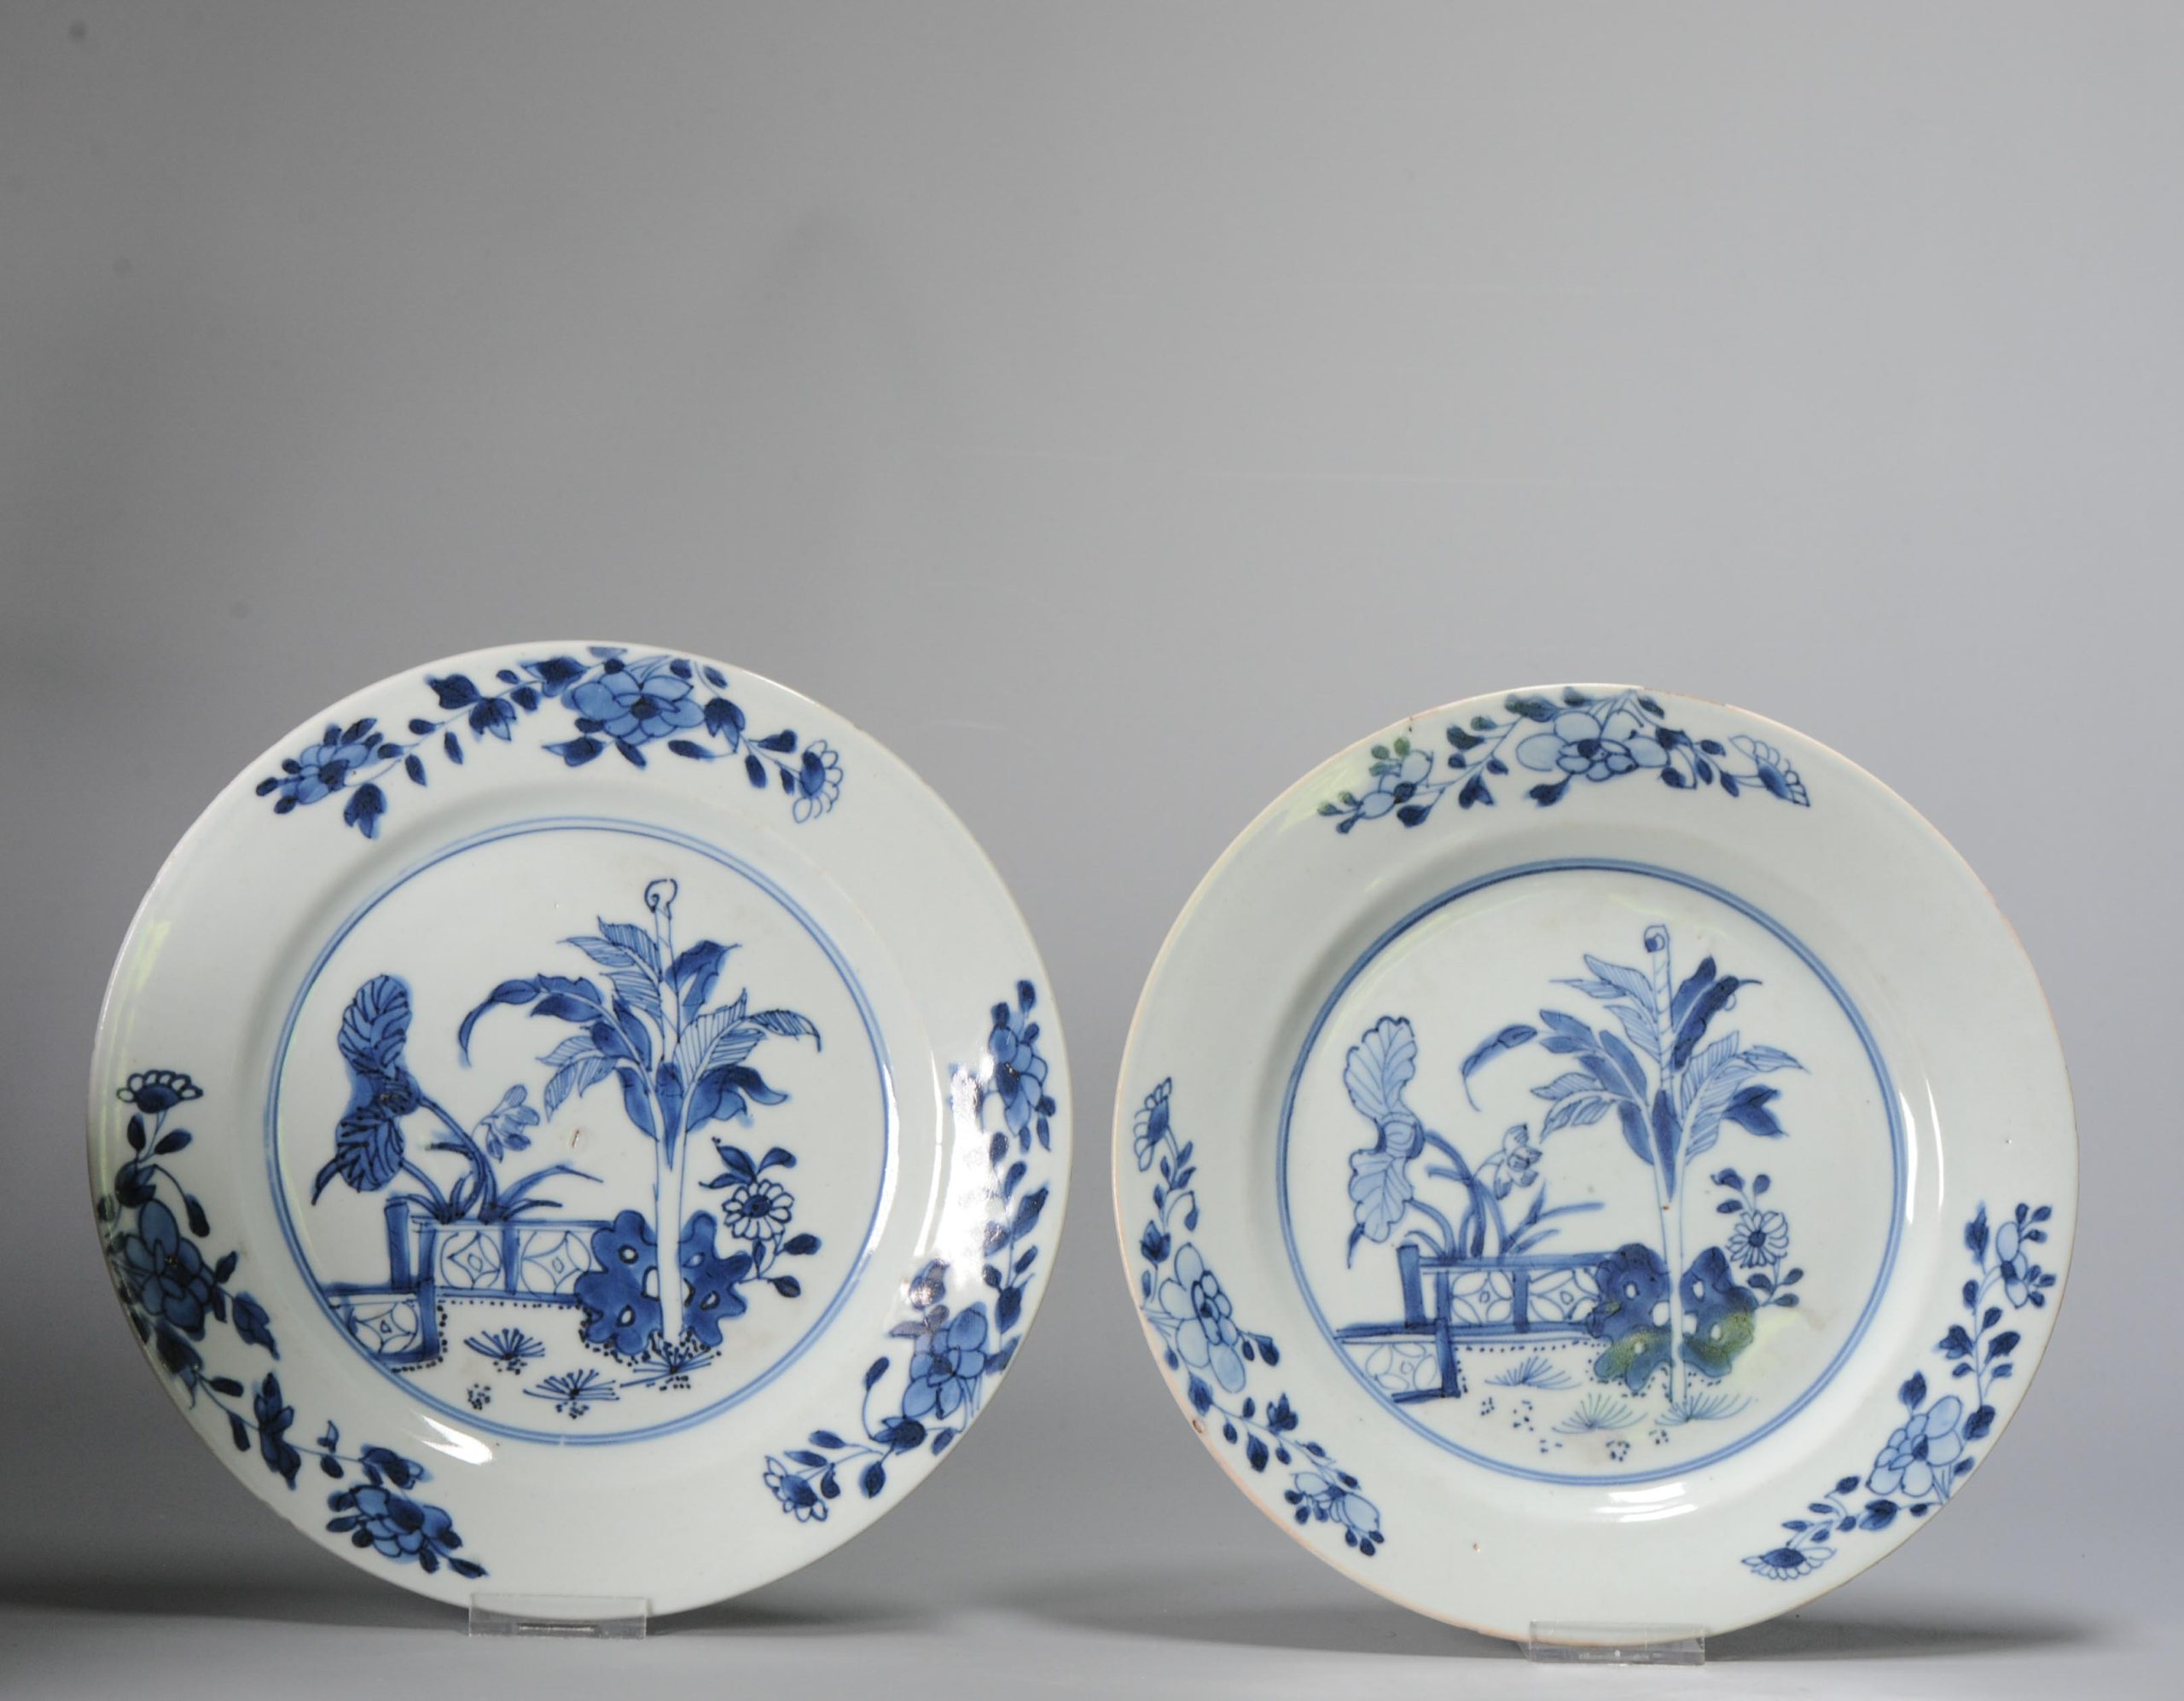 #2 Antique Chinese Porcelain 18th C Qing Period Blue White Set Dinner Plates